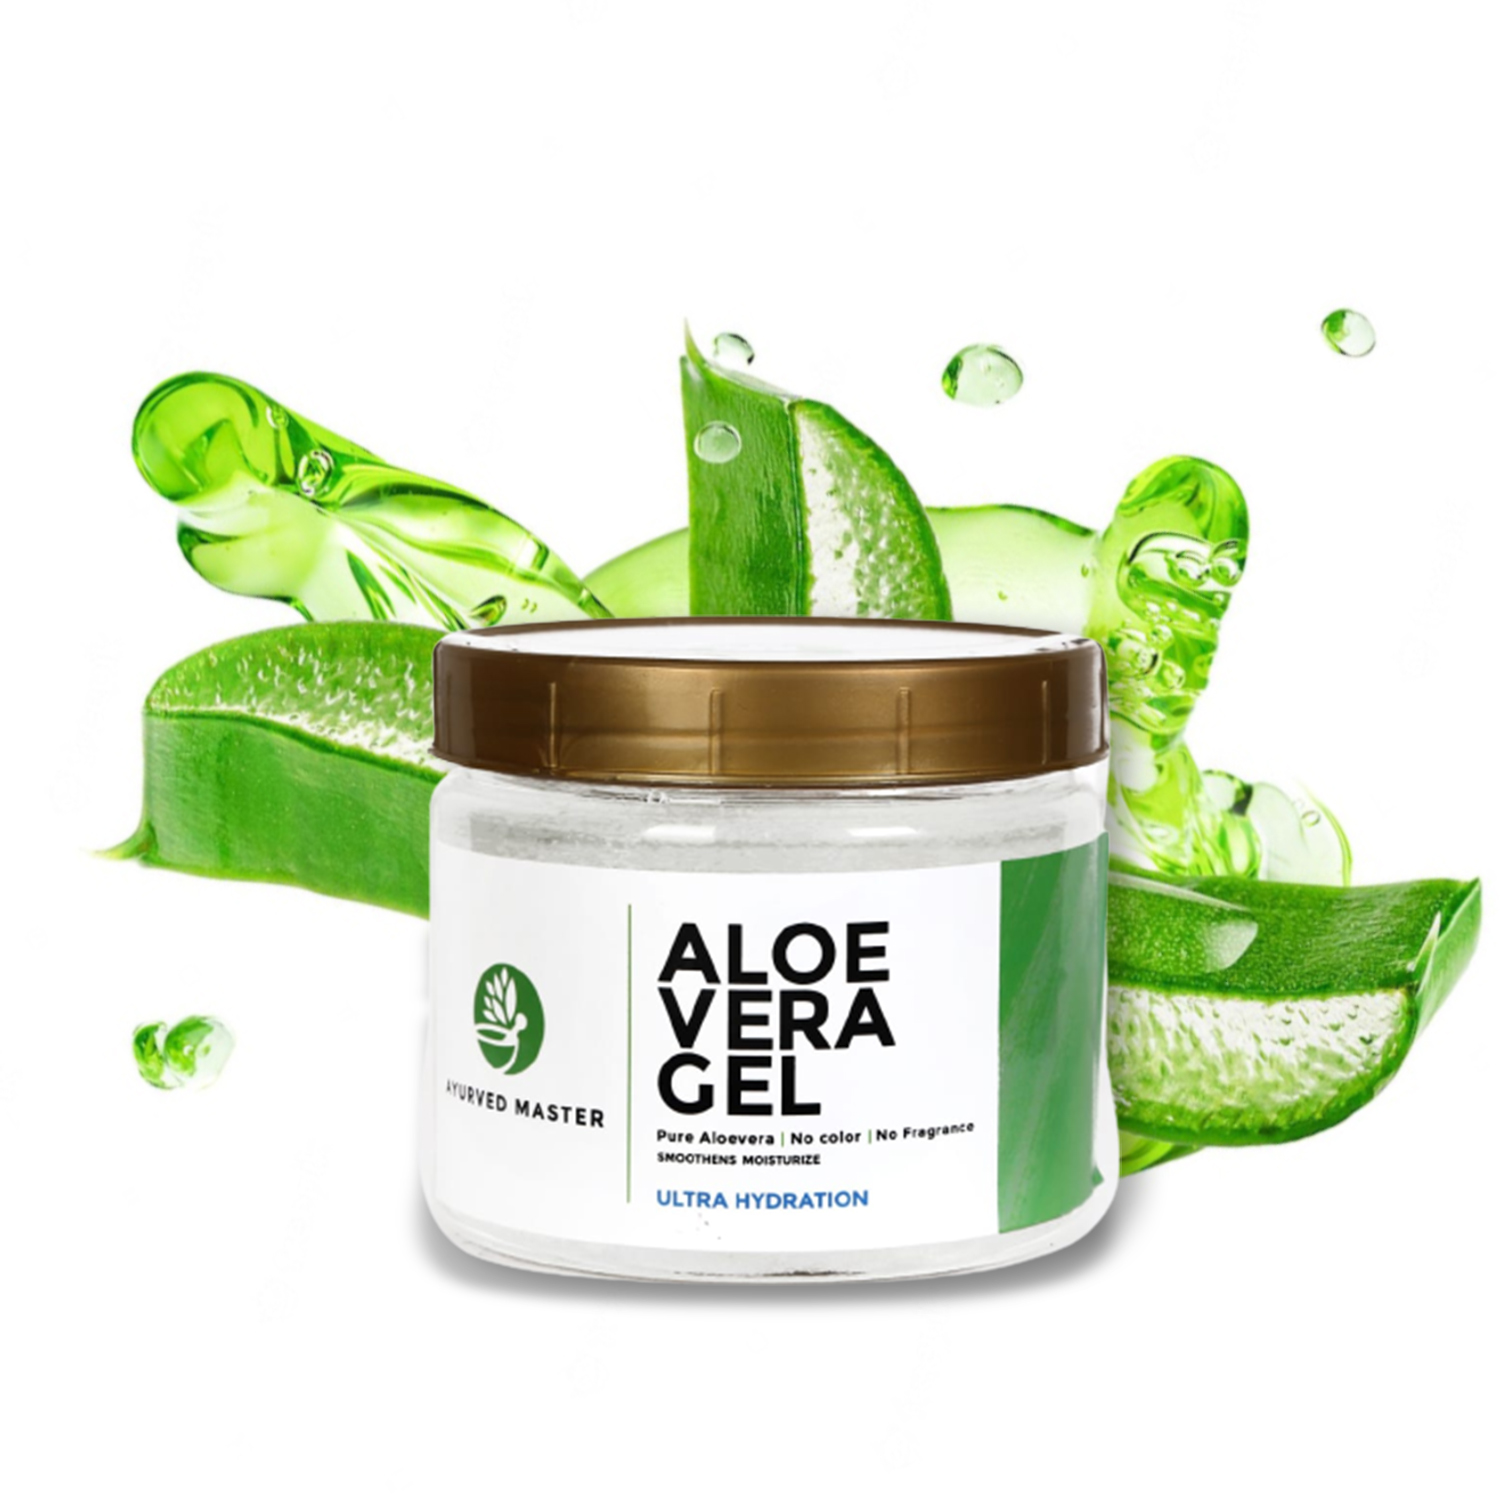 Premium Quality Ultra Hydrating and ultra  Moisturizing Aloevera gel, this is Upto 99% Pure Aloe Vera Gel it is used for Silky, Soft and Smoothens Skin | 500 GM